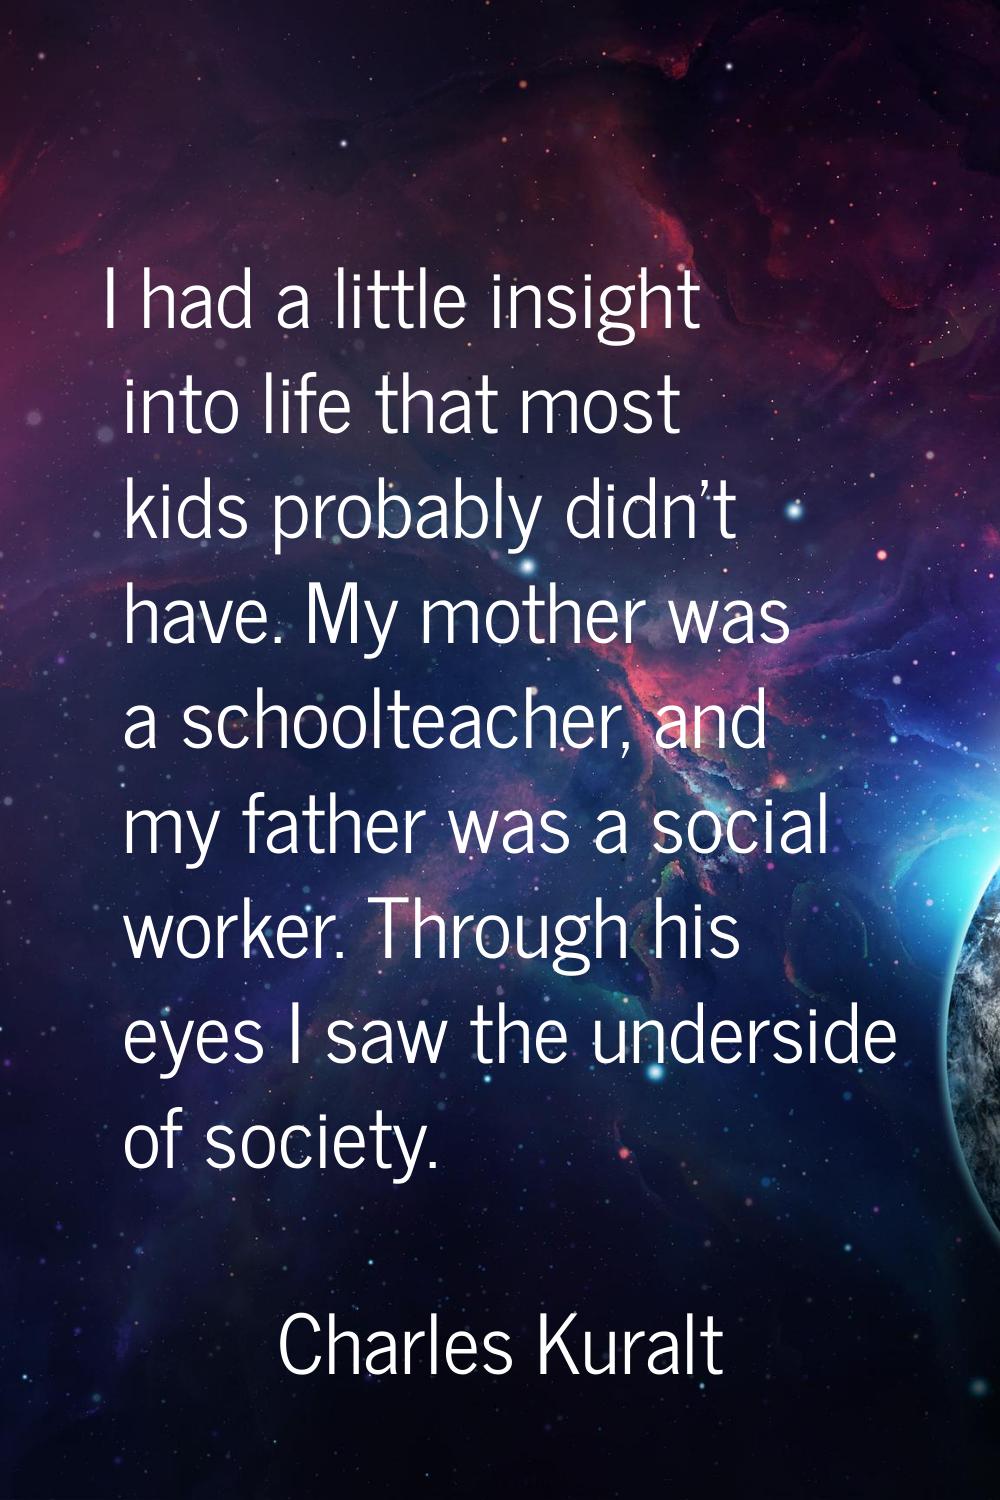 I had a little insight into life that most kids probably didn't have. My mother was a schoolteacher